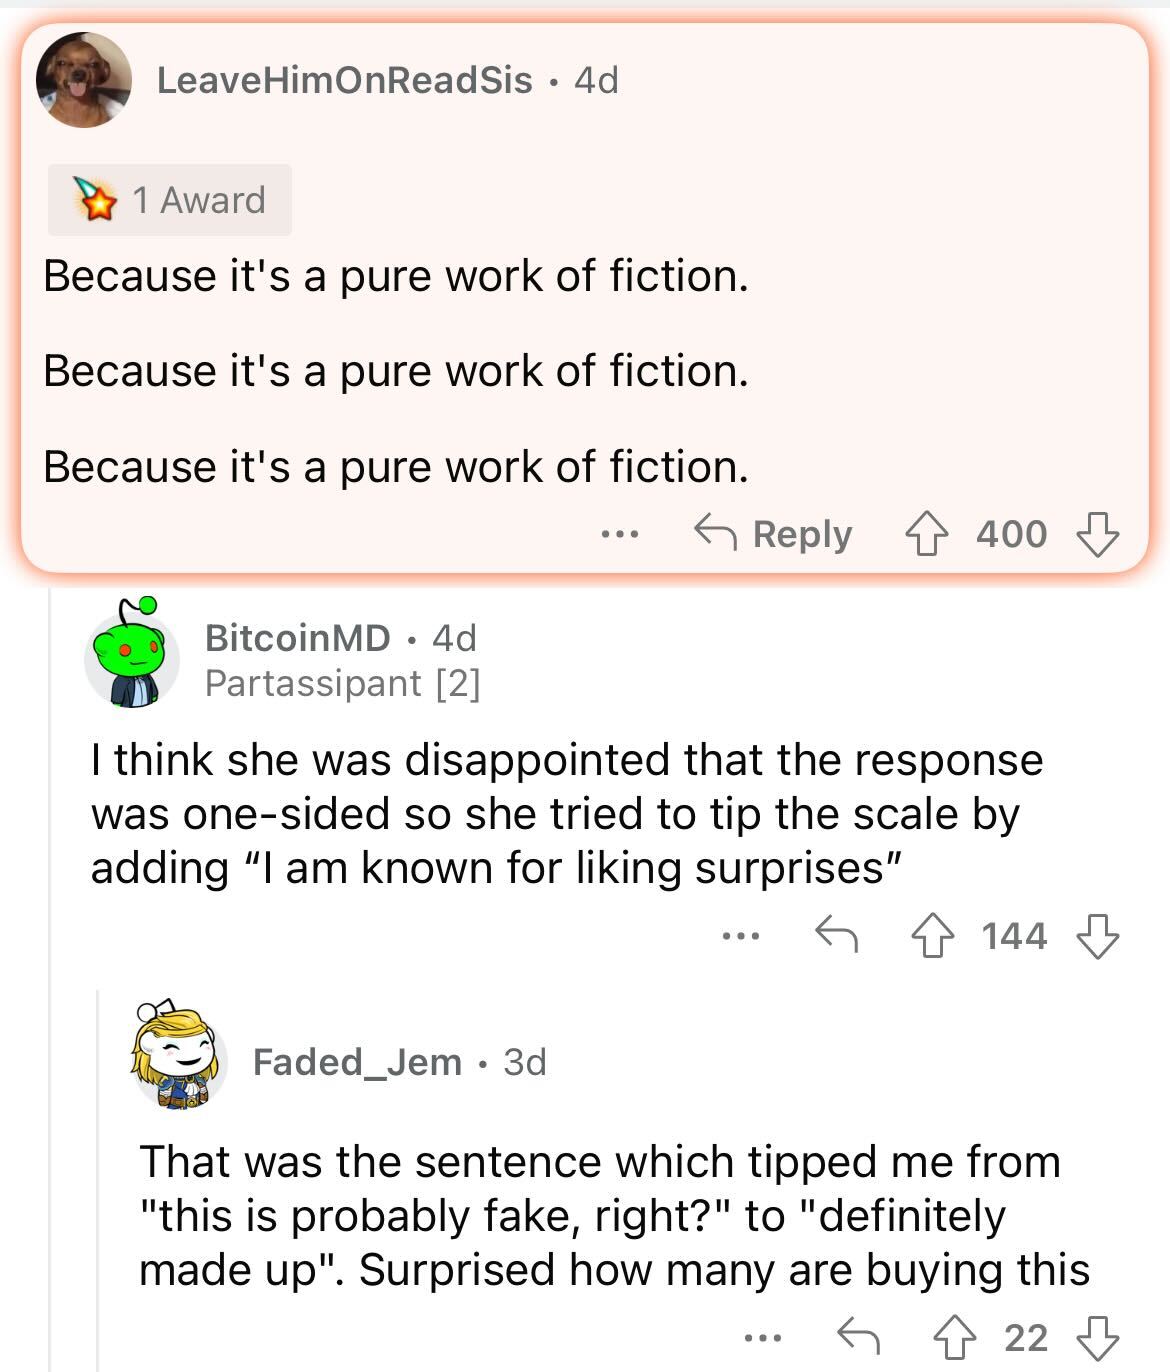 am i the asshole thread on reddit - paper - LeaveHimOnReadSis 4d 1 Award Because it's a pure work of fiction. Because it's a pure work of fiction. Because it's a pure work of fiction. BitcoinMD 4d Partassipant 2 Faded Jem 3d ... I think she was disappoint